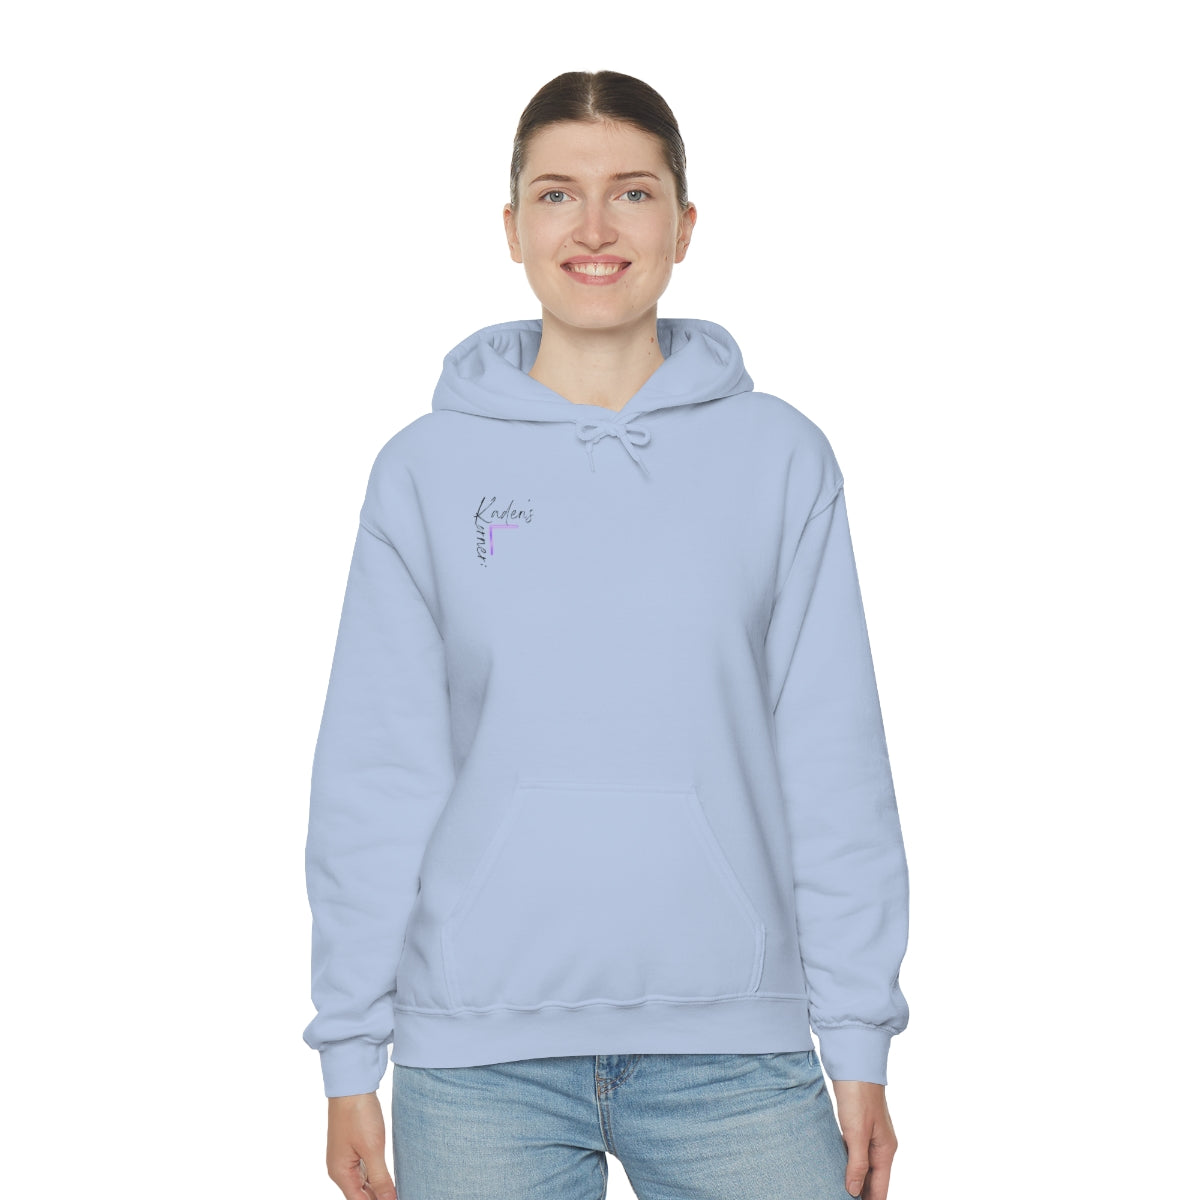 No one else can play your part*Unisex Heavy Blend™ Hooded Sweatshirt